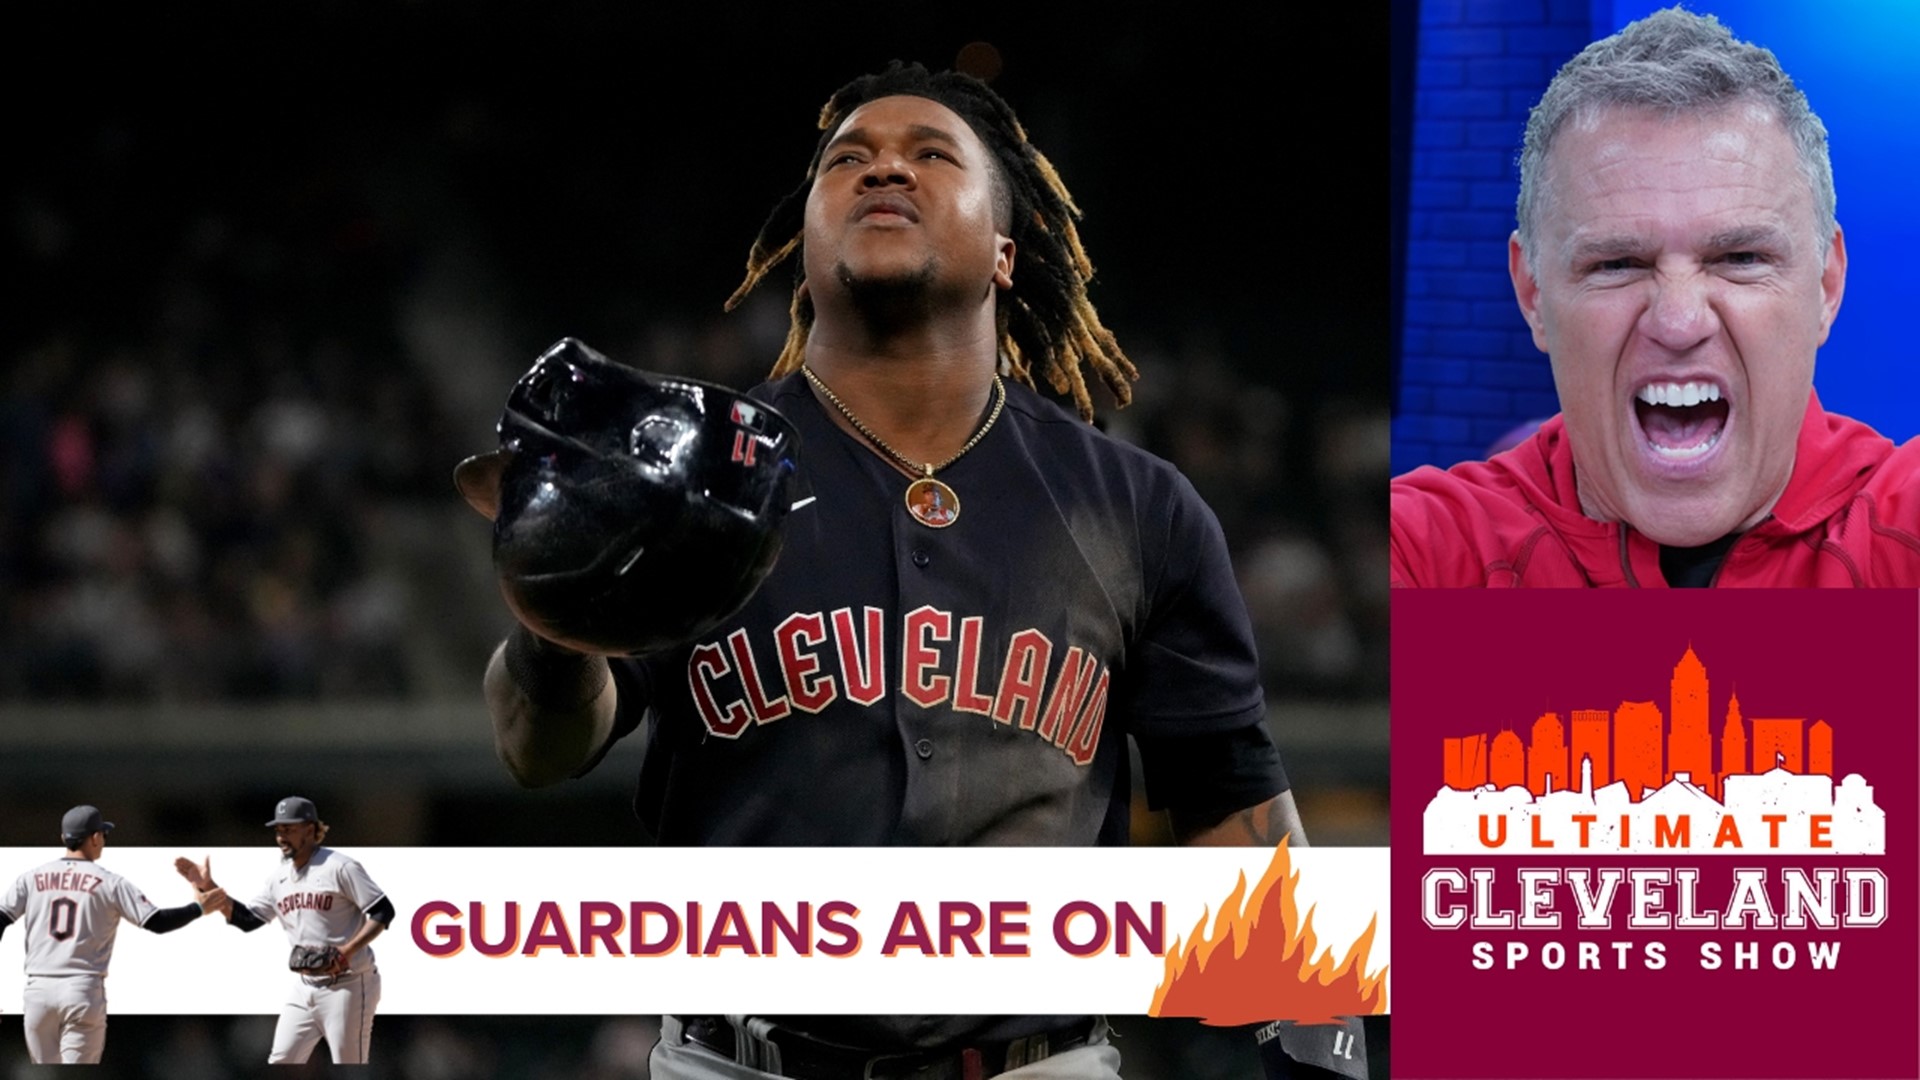 The guys start off talking about how the Cleveland Guardians are the best in the MLB right now. Adam "The Bull" and Jay mention the improvements on the team.